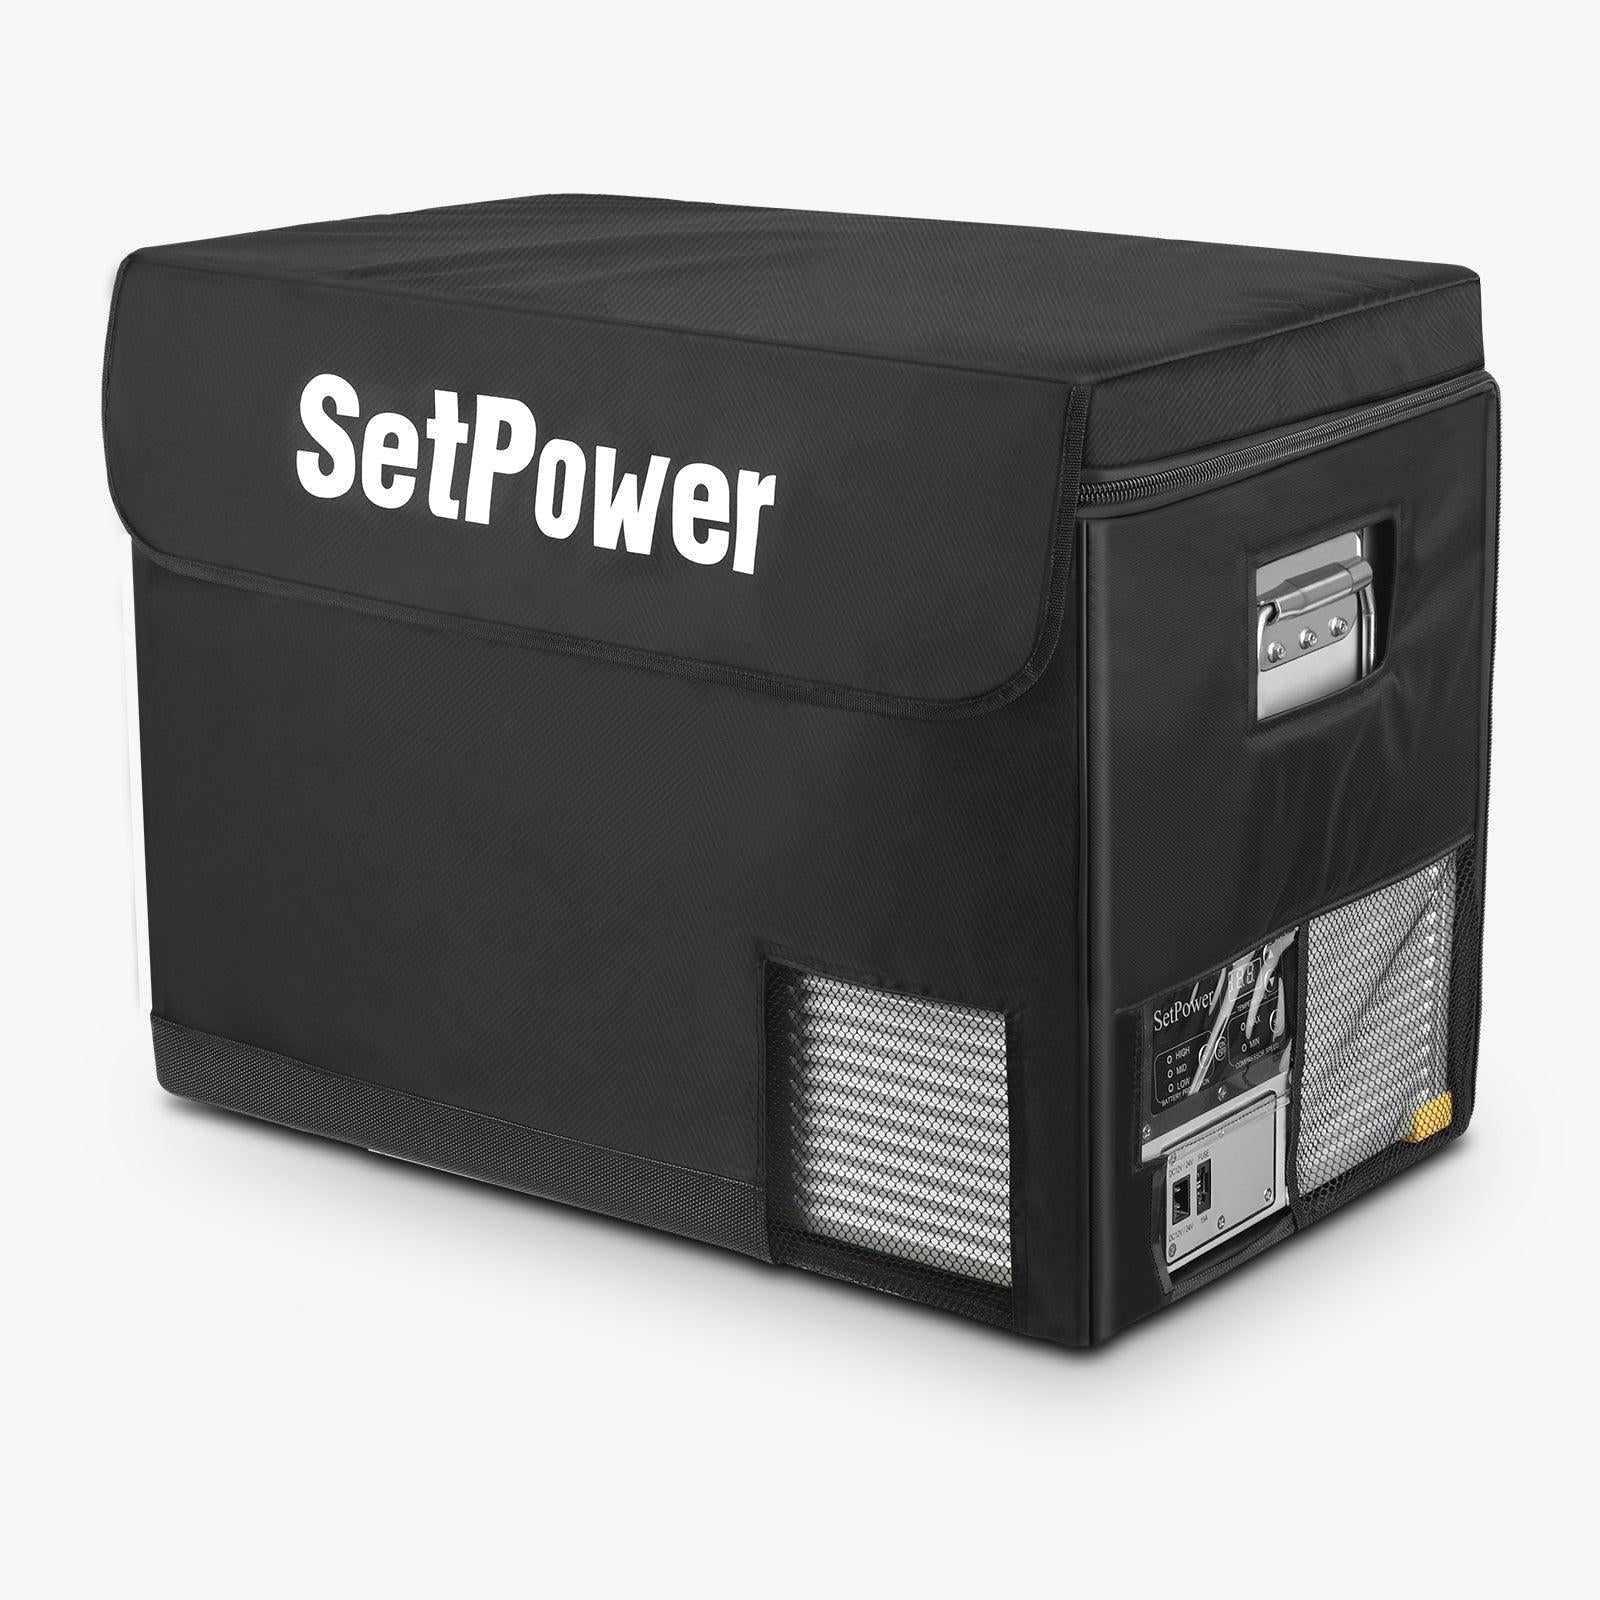 Setpower Insulated Protective Cover For RV45S Freezer